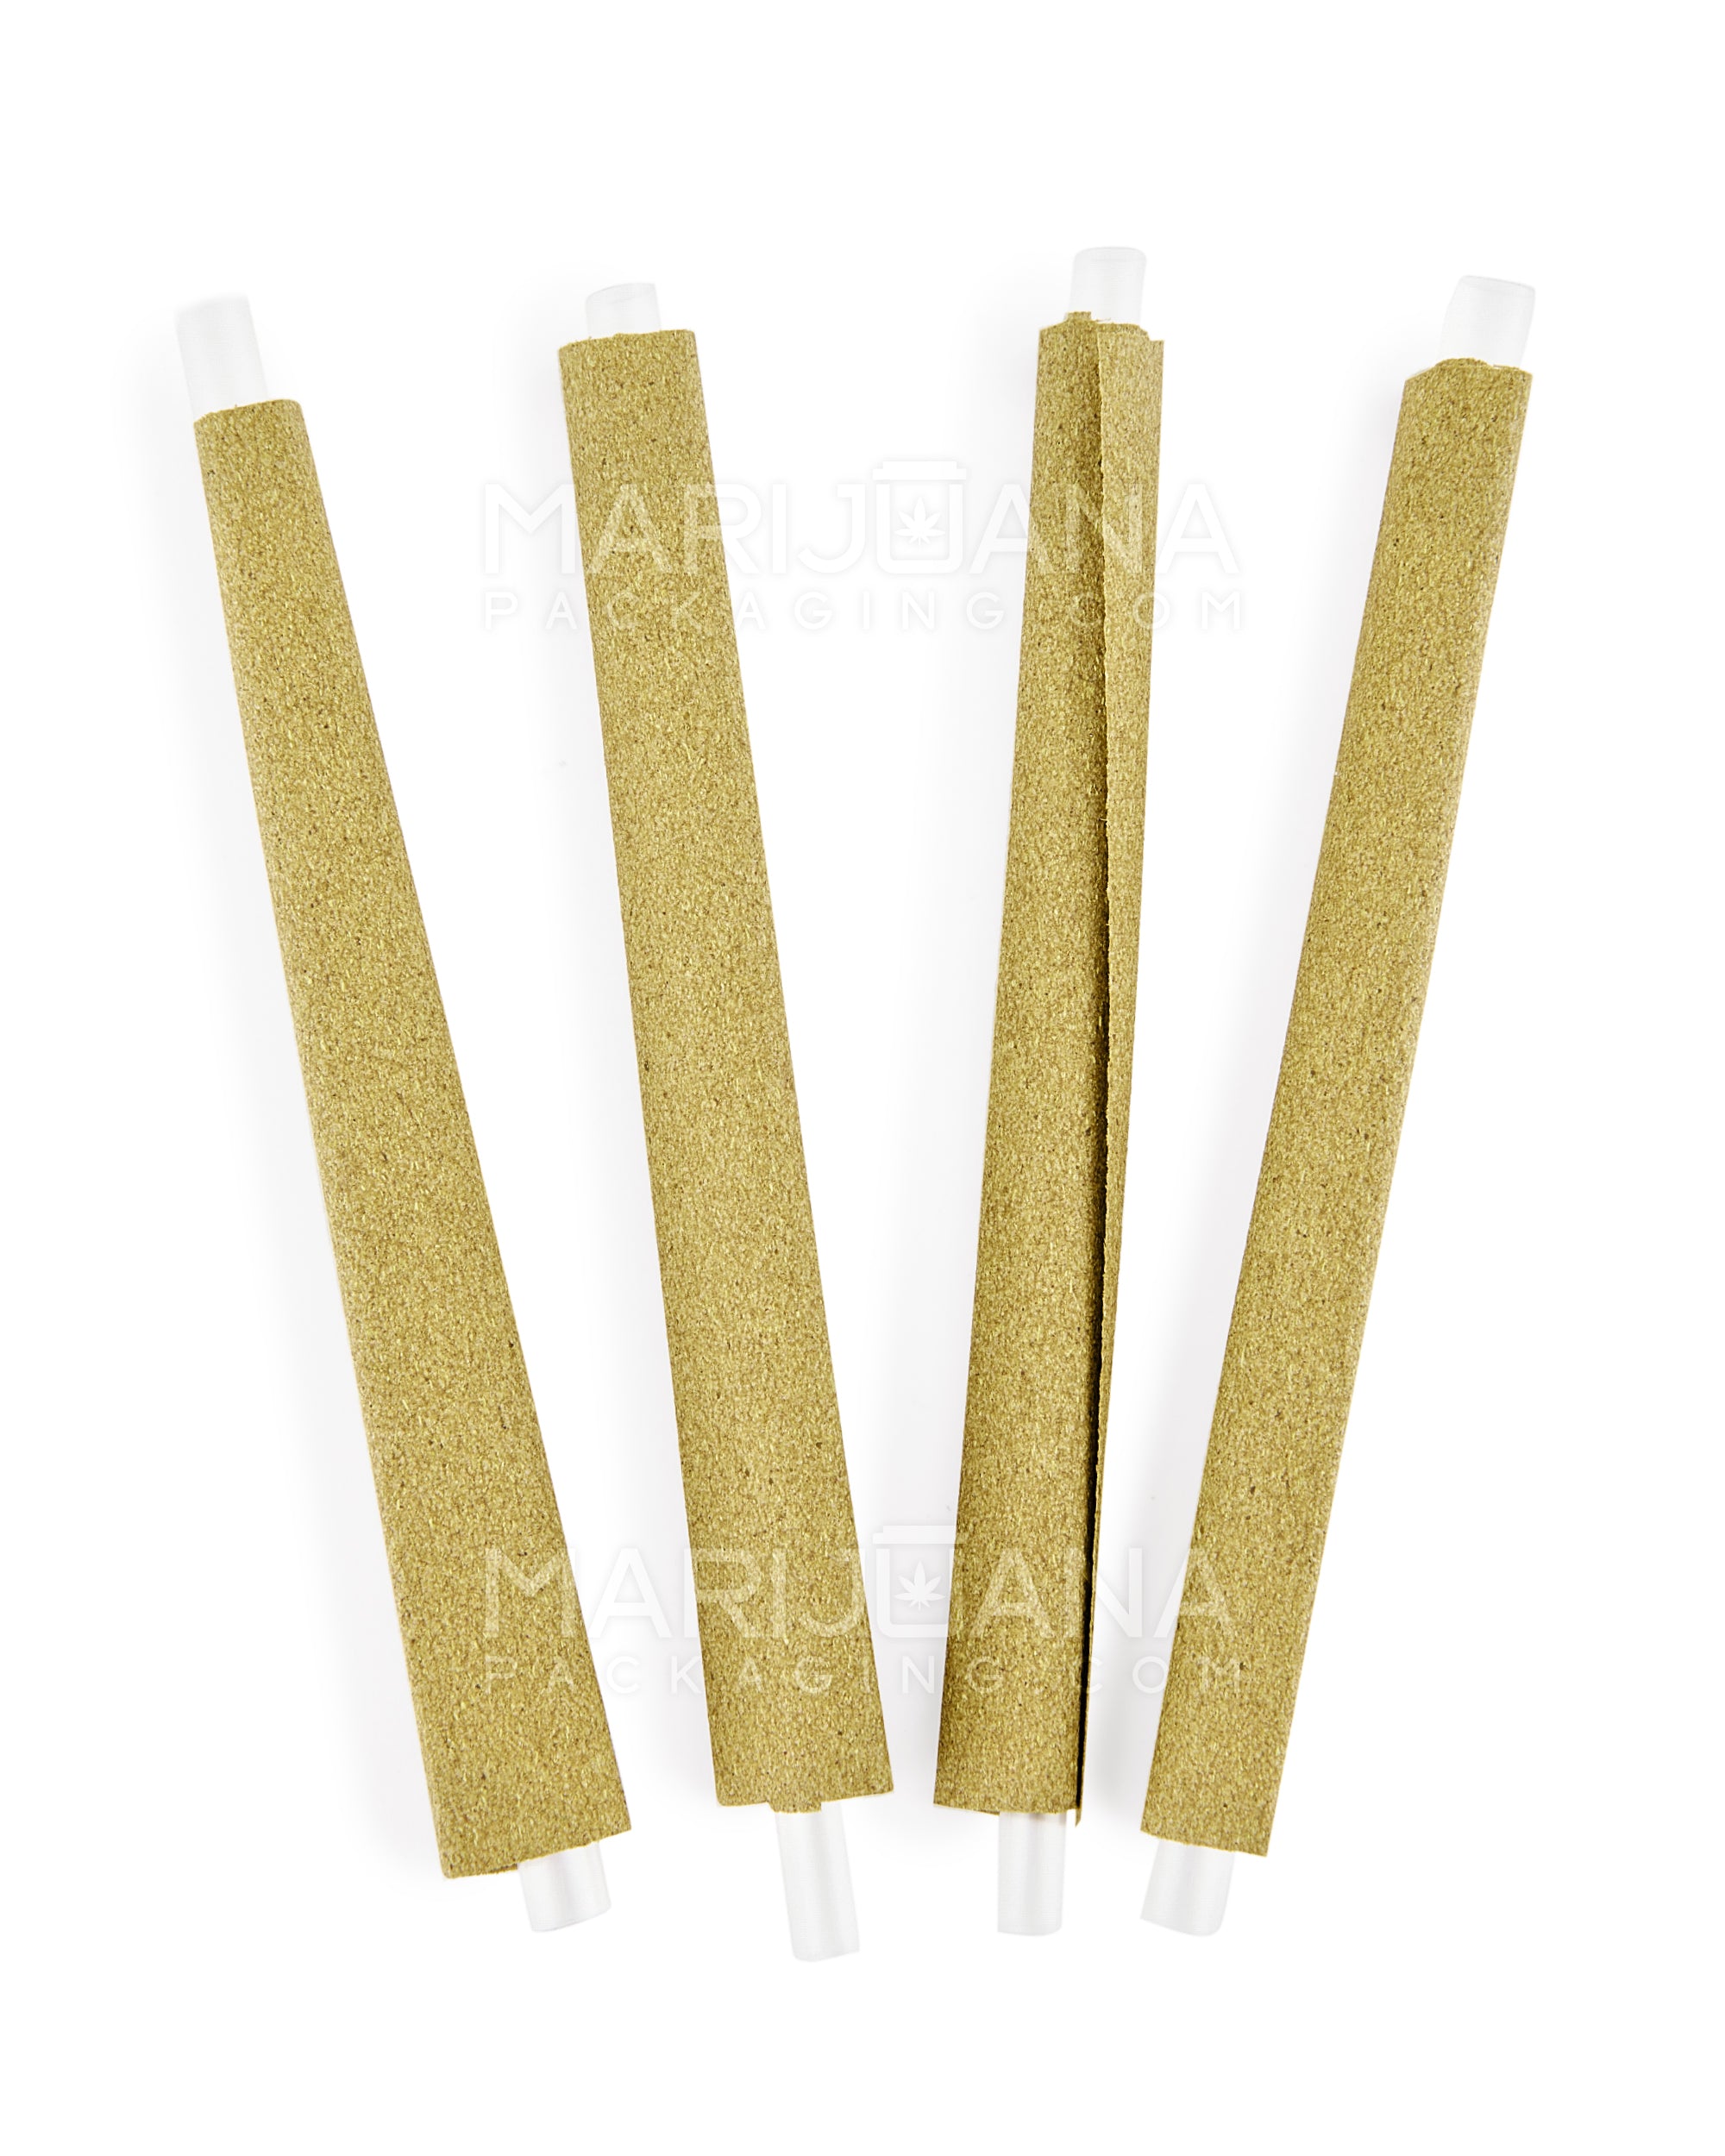 TWISTED HEMP | 'Retail Display' Blunt Wraps | 100mm - Endless Summer - 15 Count - 5